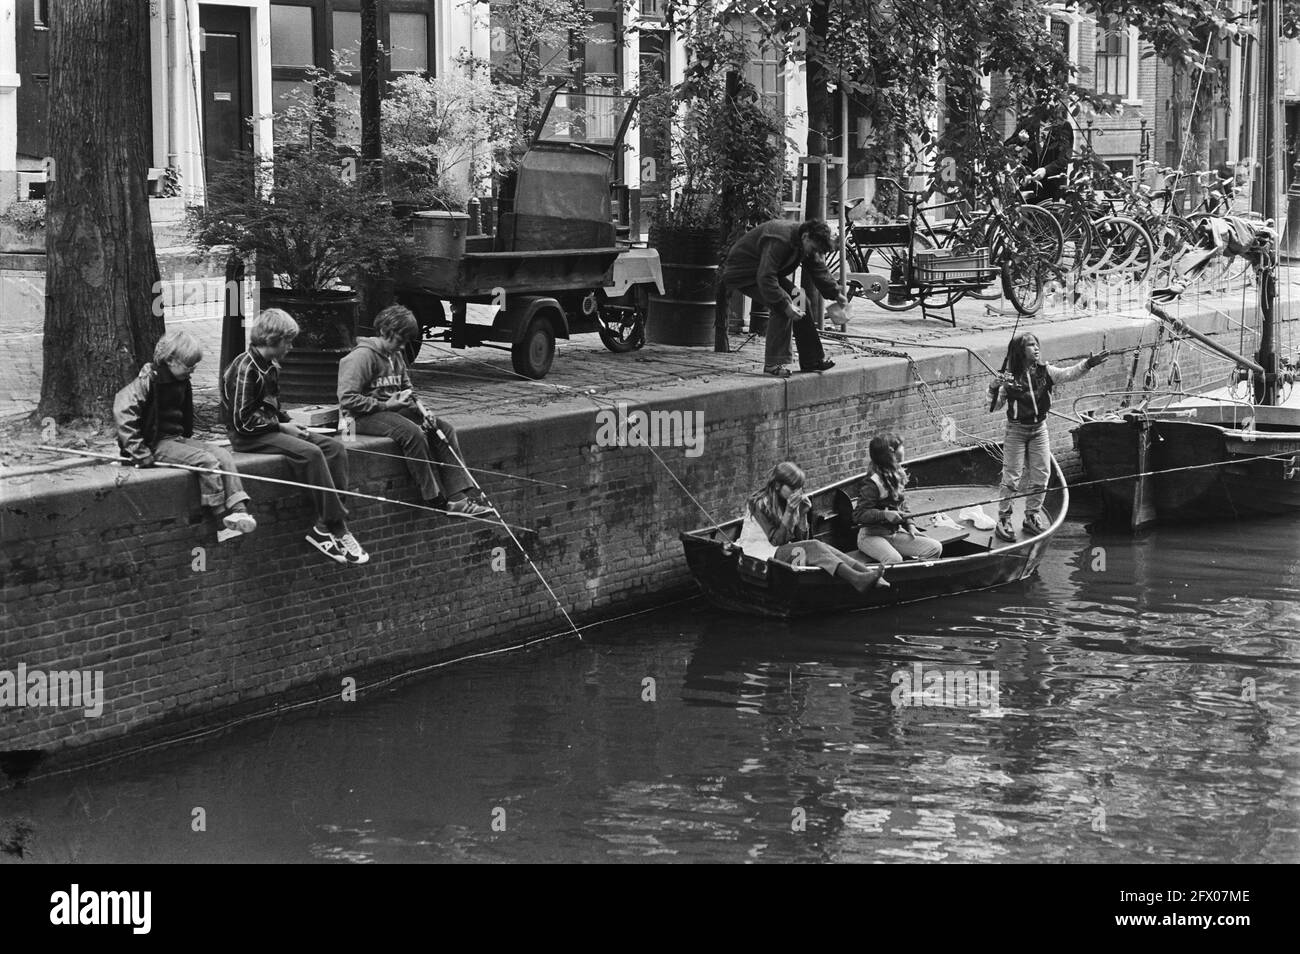 School vacations; fishing contest for youth at Recht Boomsloot (also called Rechtboomsloot), Amsterdam, July 3, 1980, youth, fishing, contests, The Netherlands, 20th century press agency photo, news to remember, documentary, historic photography 1945-1990, visual stories, human history of the Twentieth Century, capturing moments in time Stock Photo